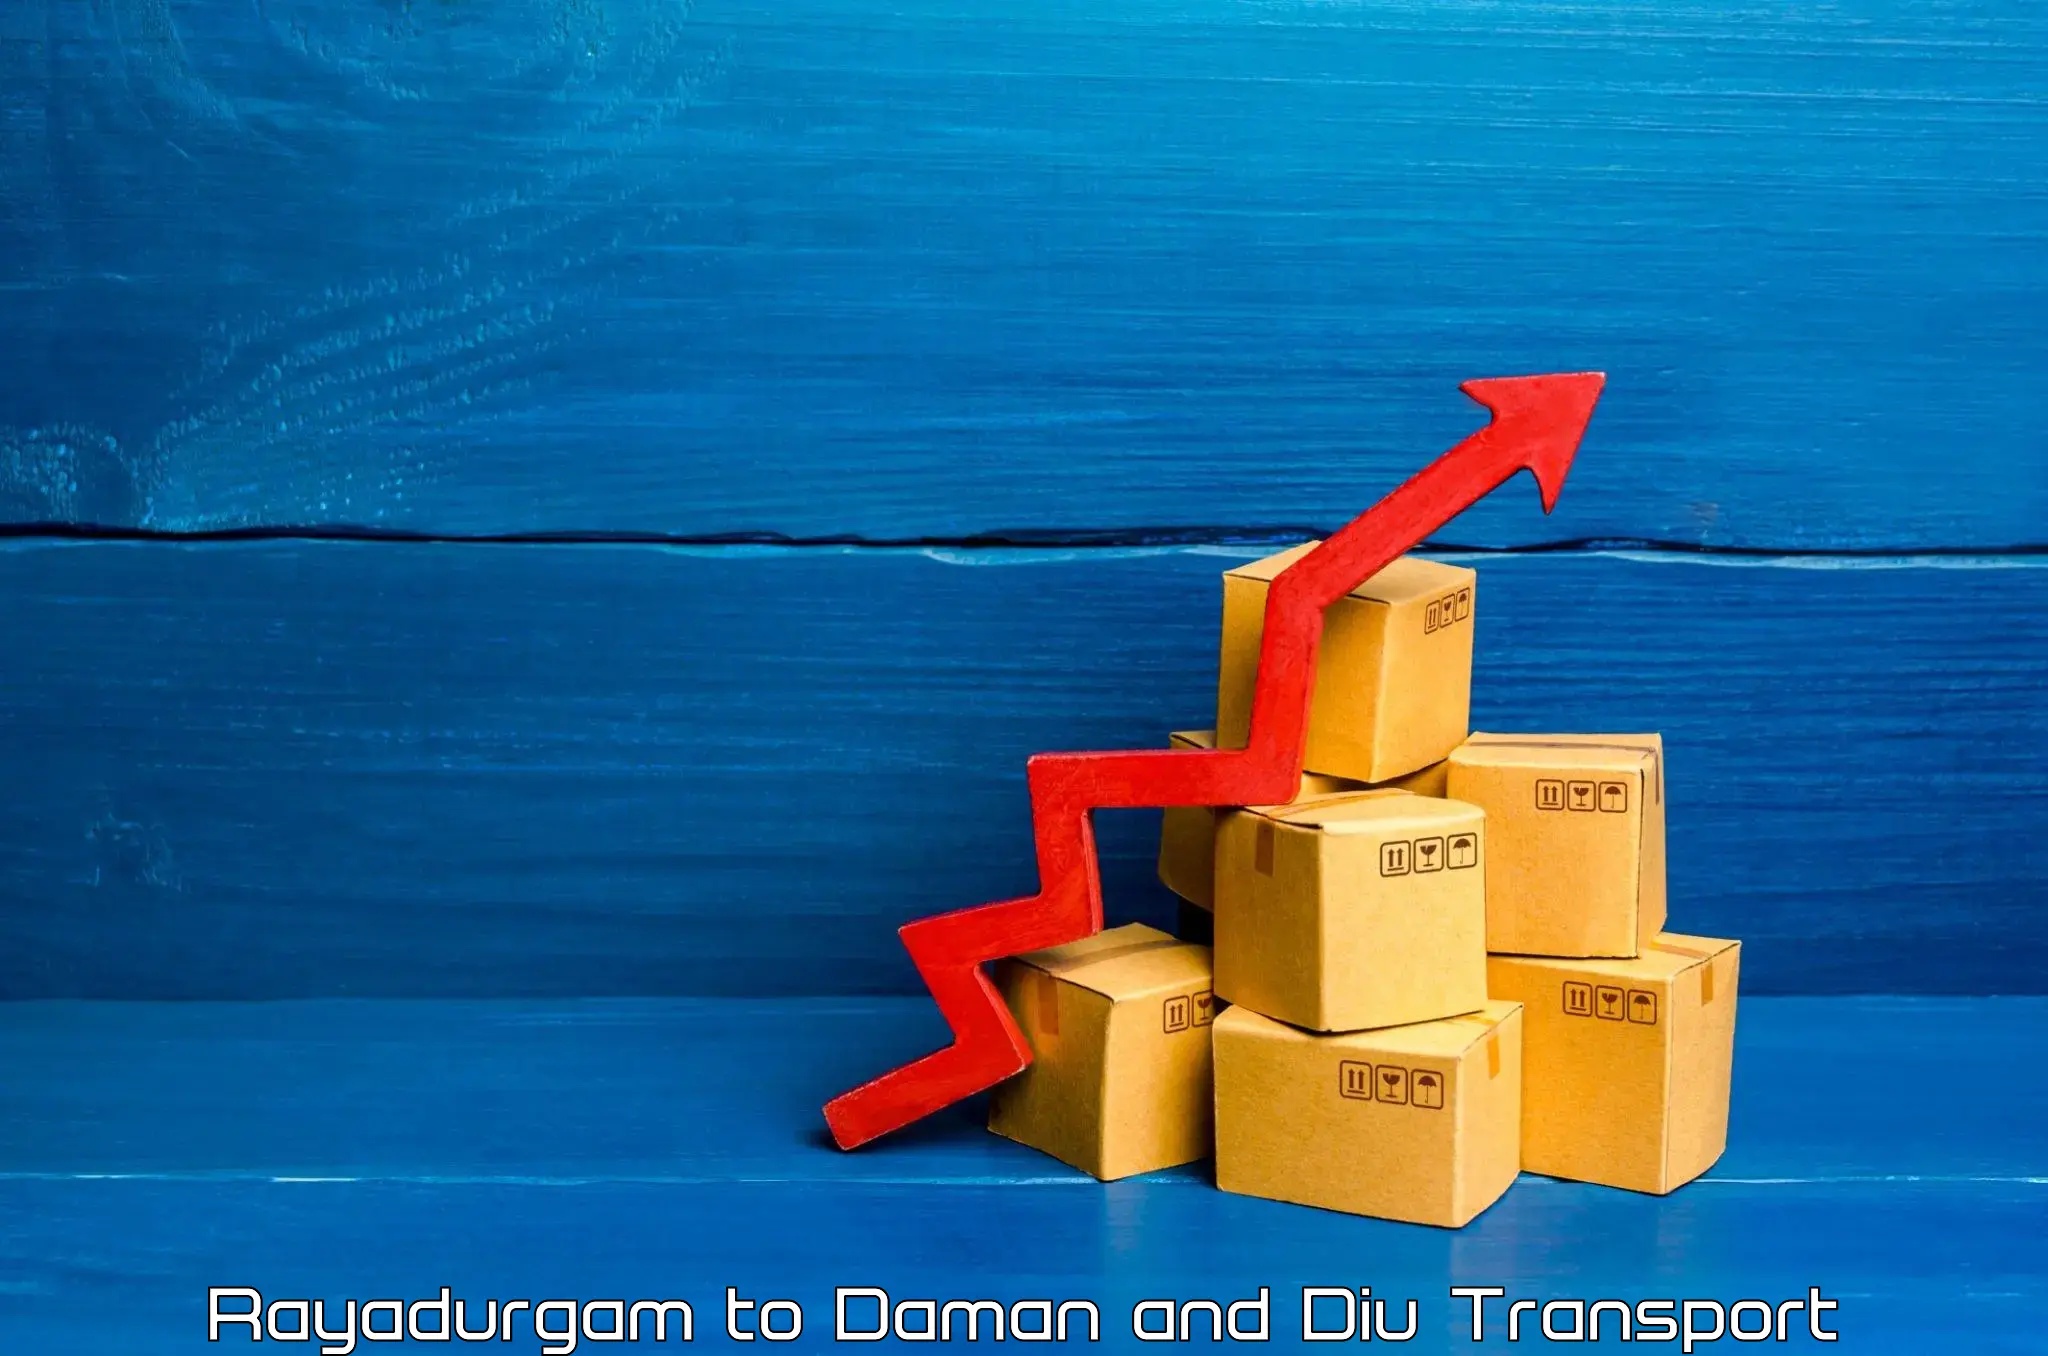 Parcel transport services in Rayadurgam to Diu